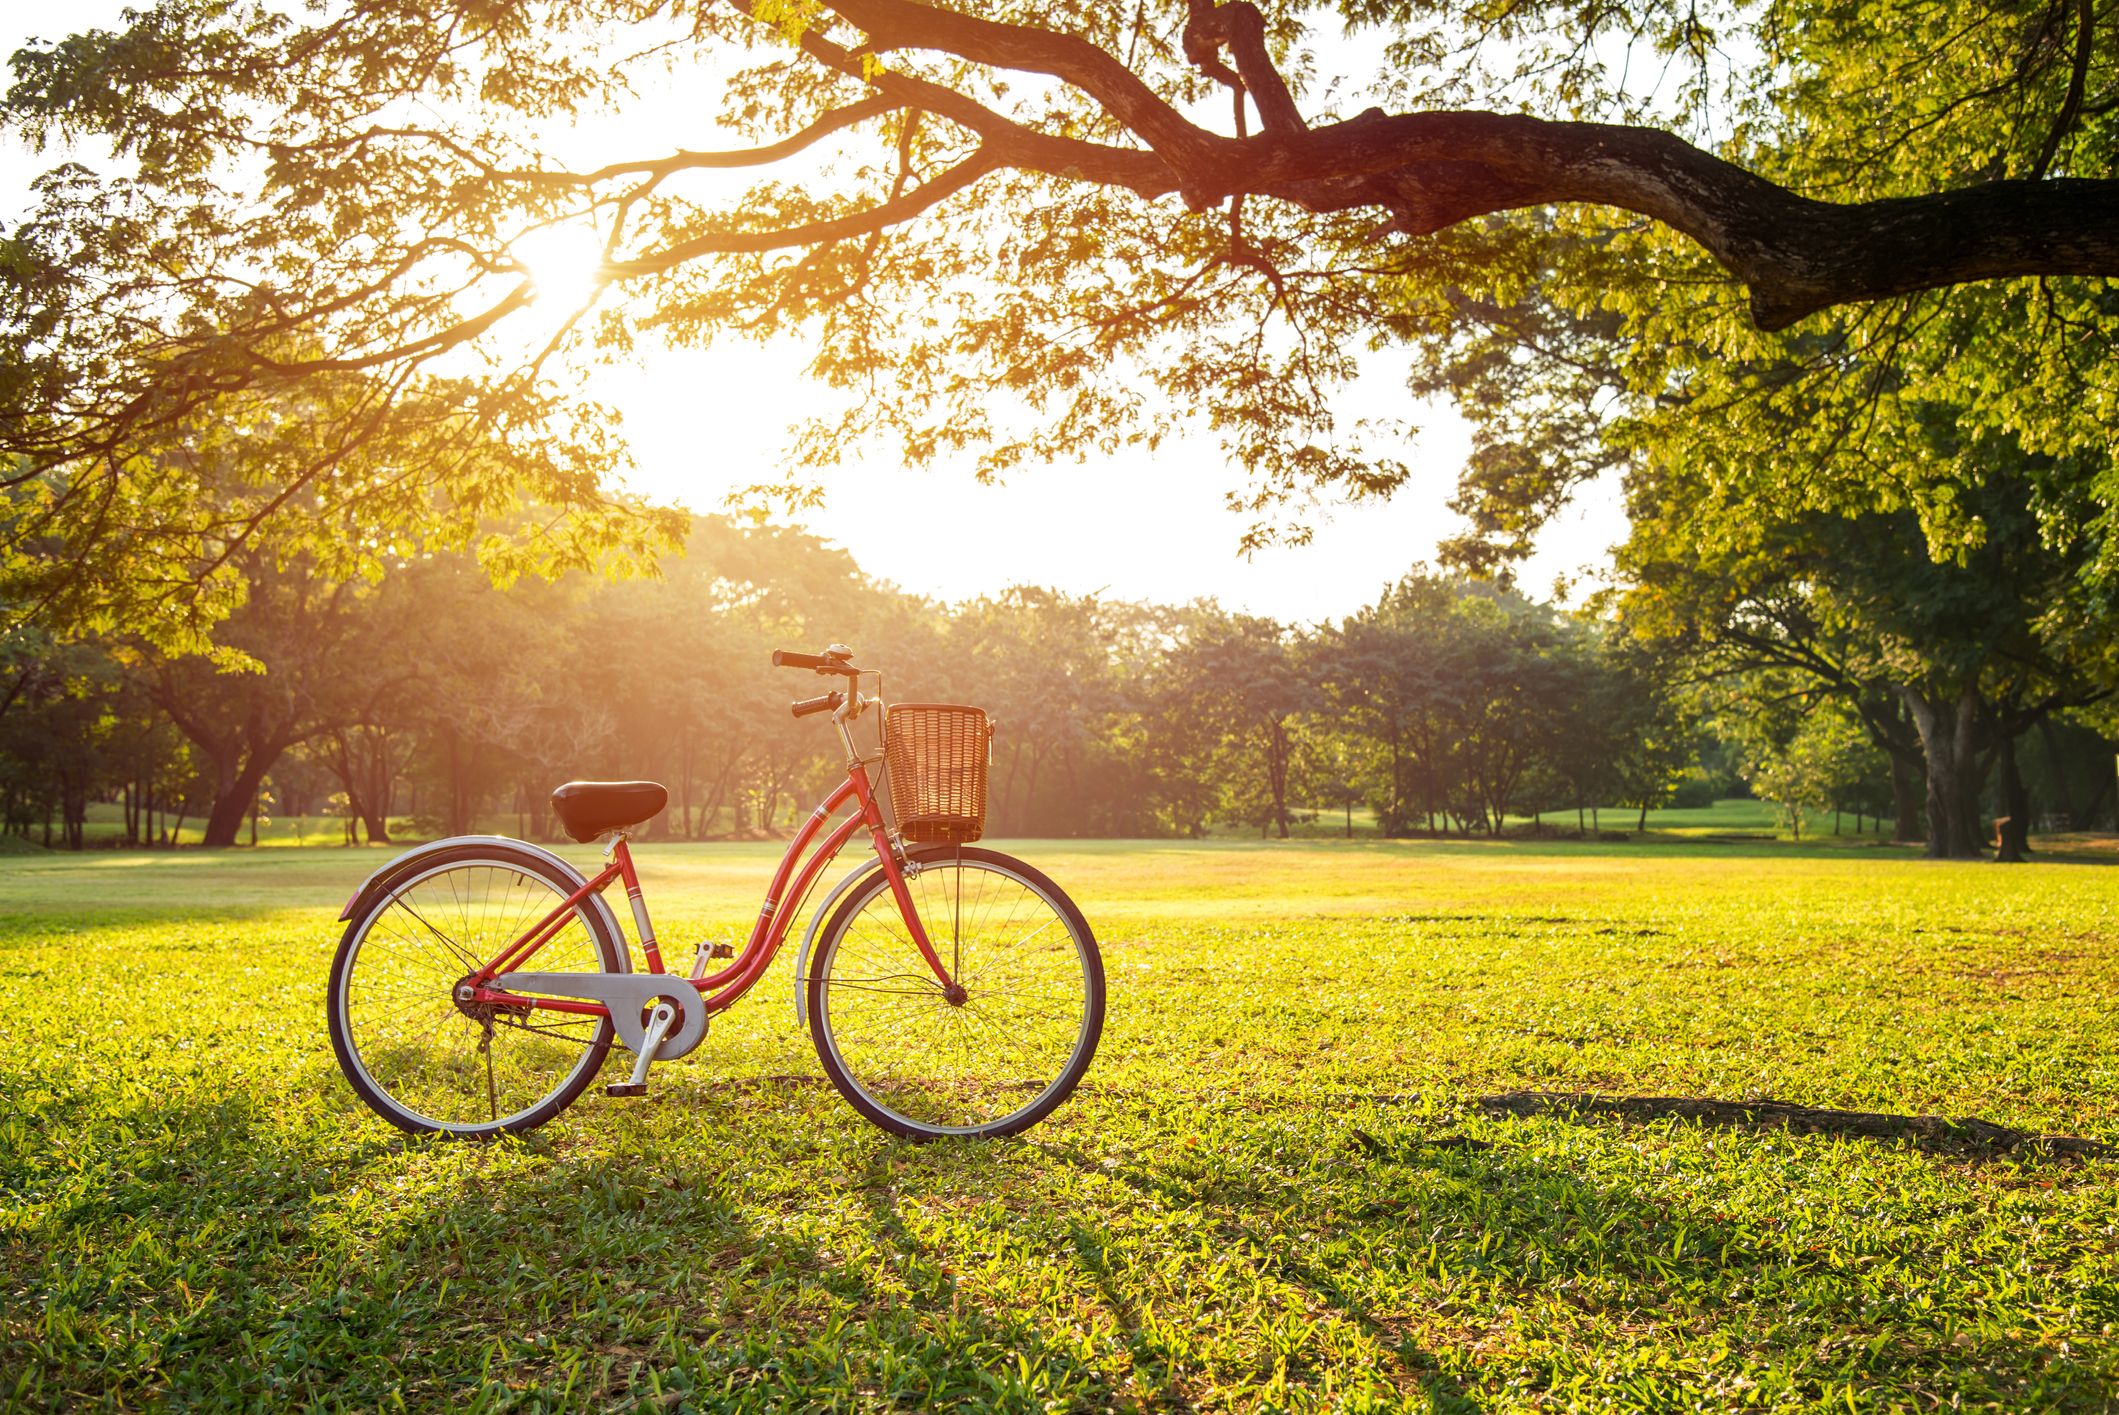 bicycle-on-grassy-field-in-park-royalty-free-image-1589916167.jpg